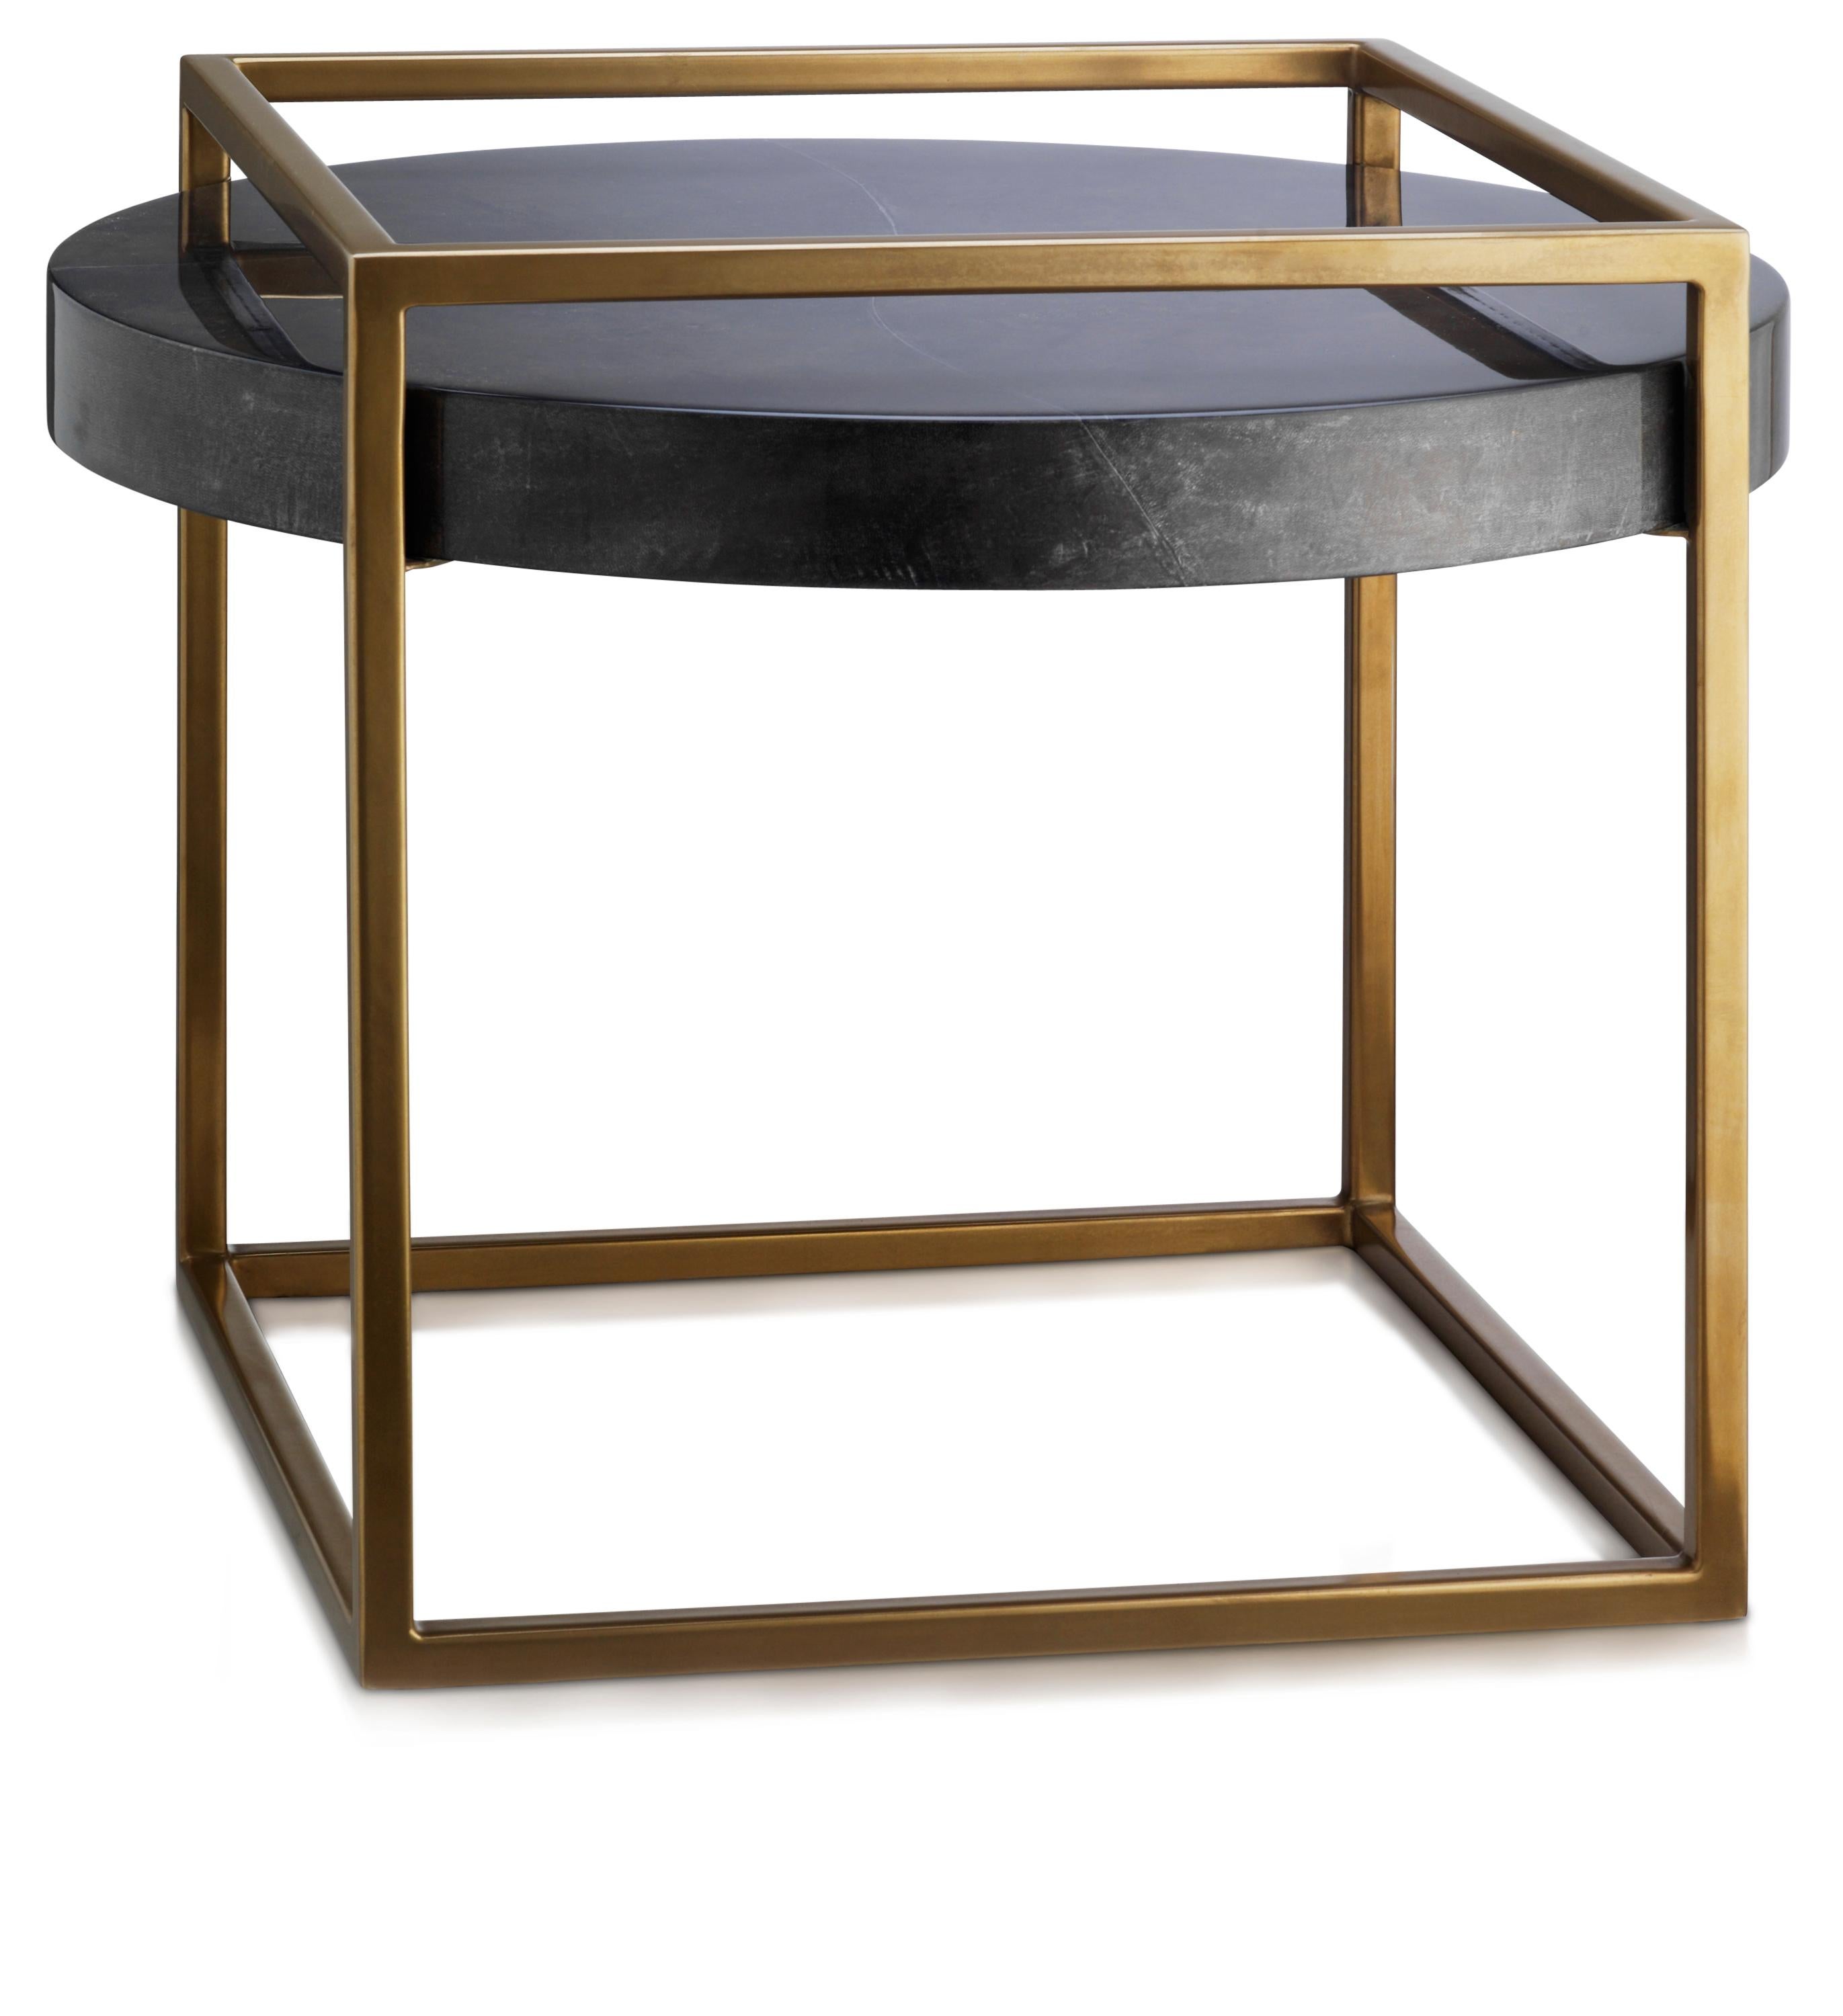 Beautiful curves contrast with the elegantly proportioned lines of the brushed gold metal frame.

Available in two sizes, the shadow side table is exquisitely finished using centuries-old techniques of handcrafted and hand-dyed parchment, in moon